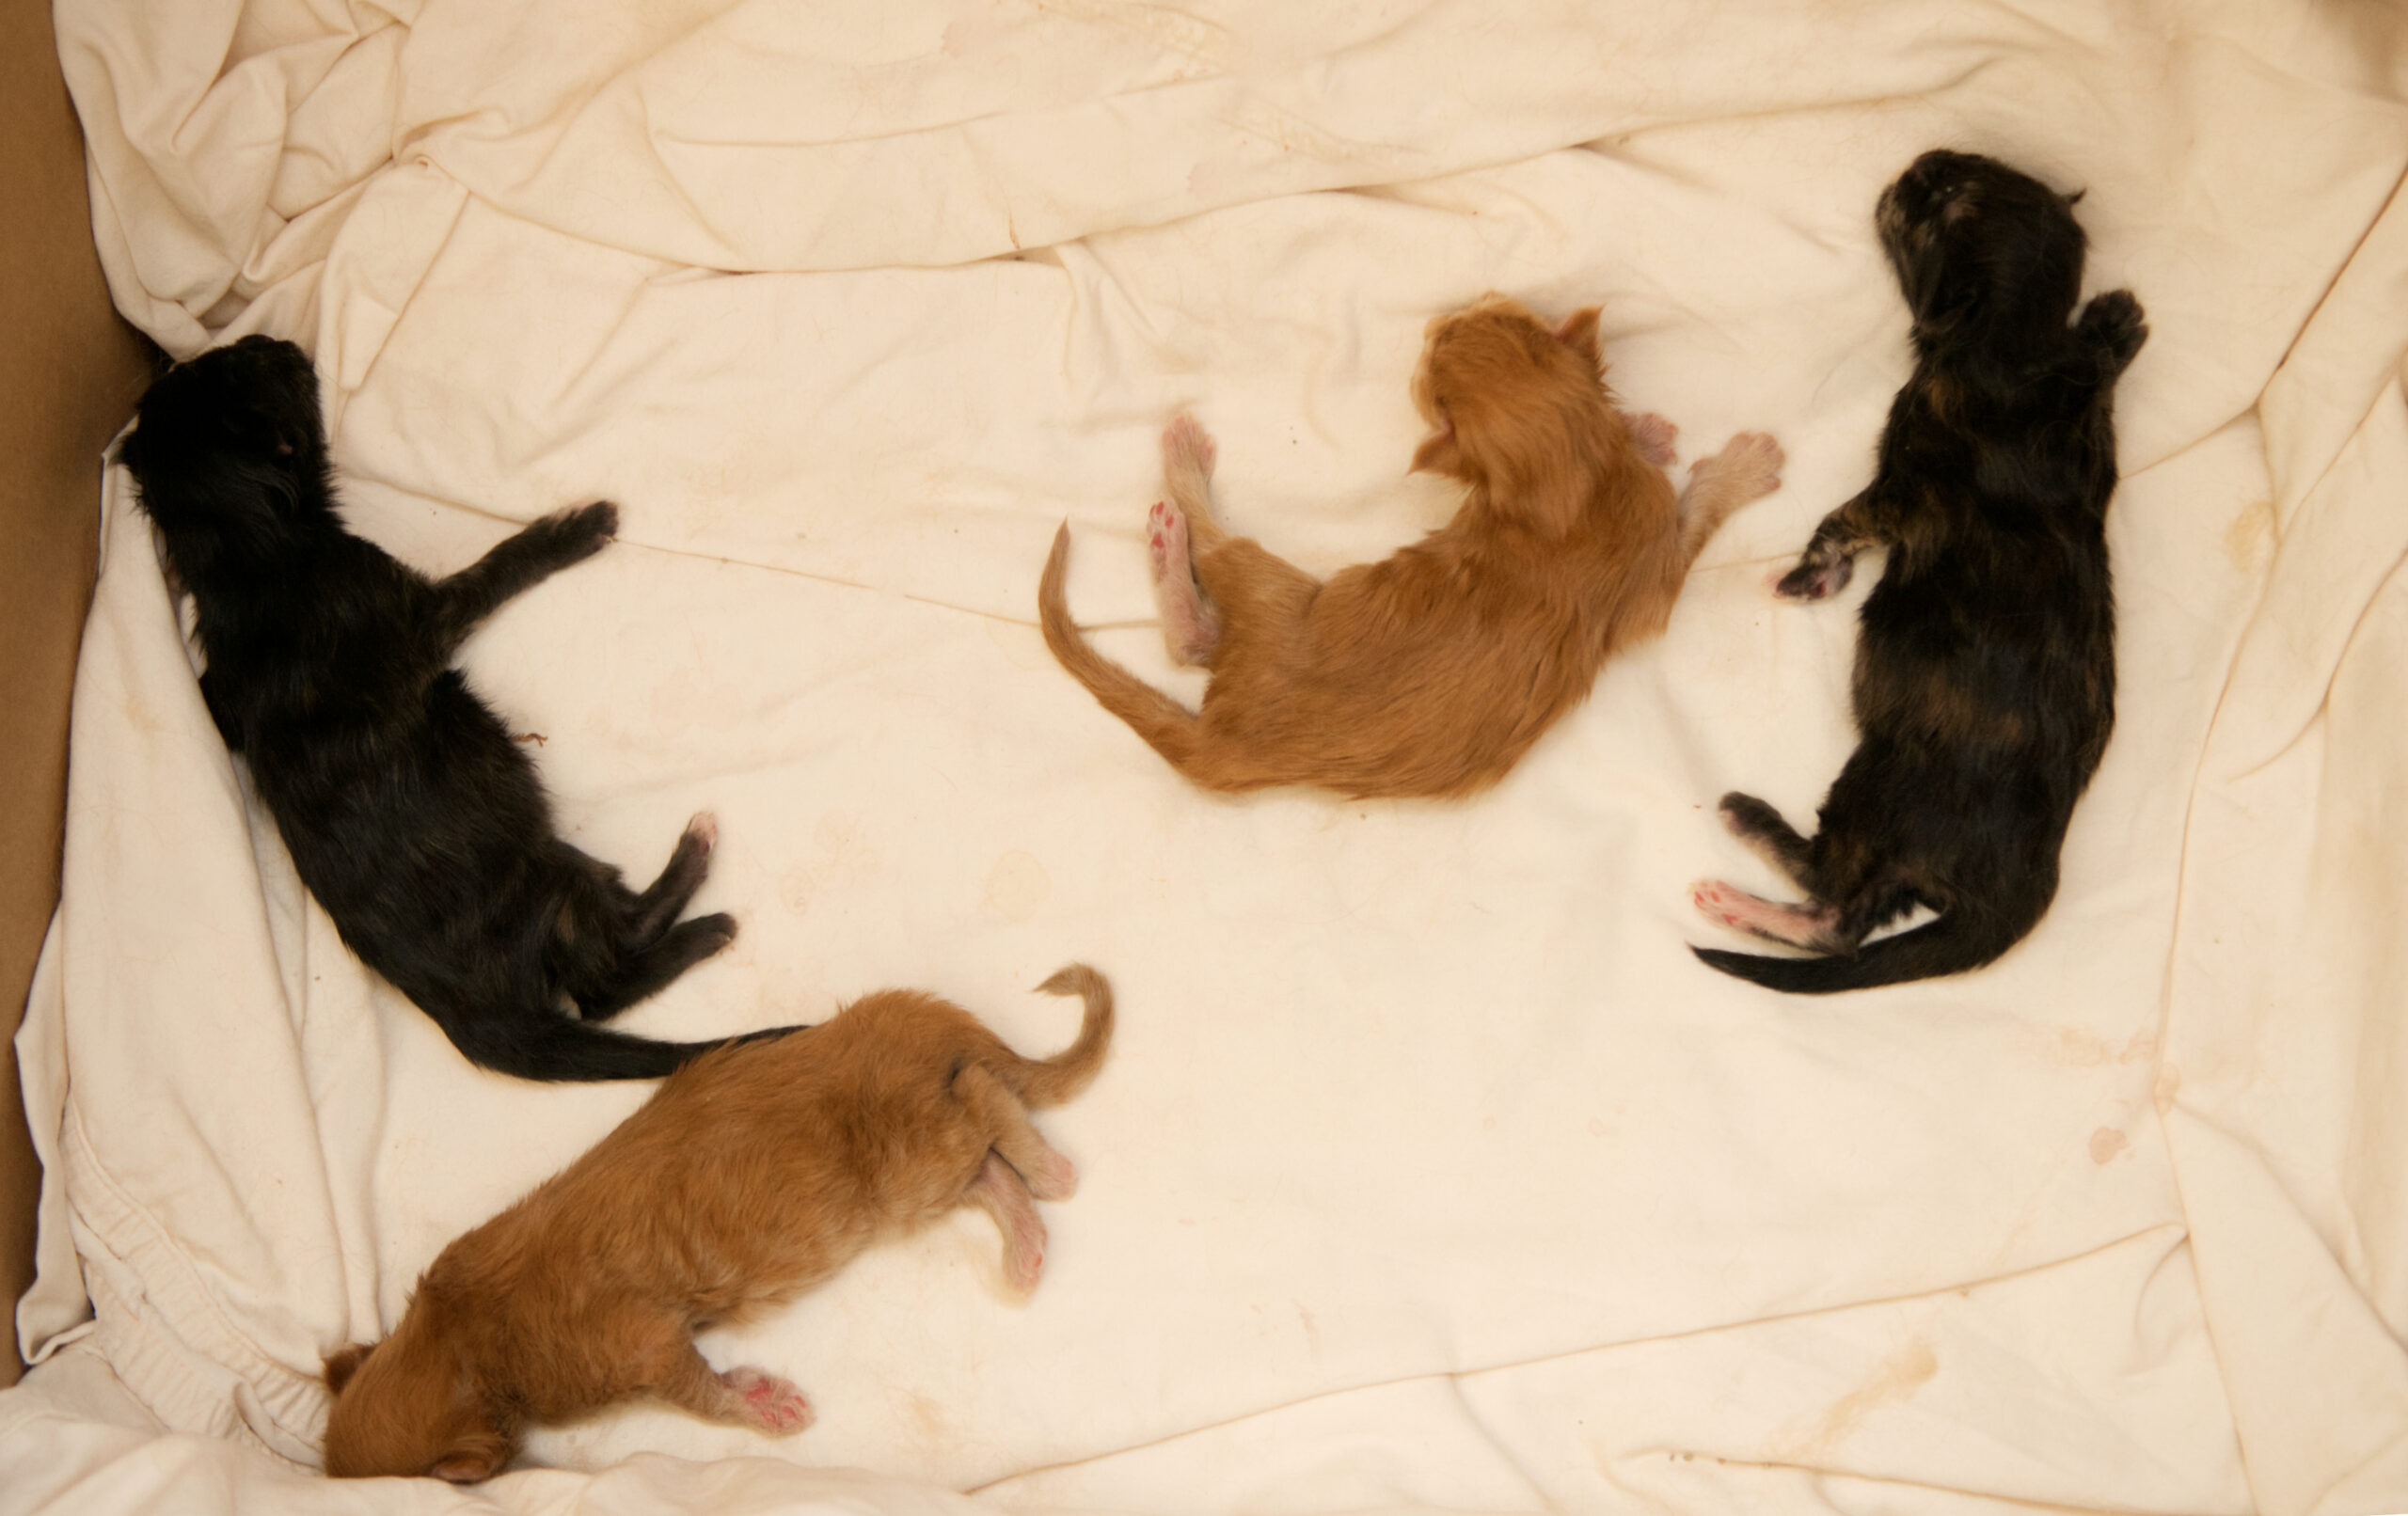 Image: Maine Coon kittens, day 2.